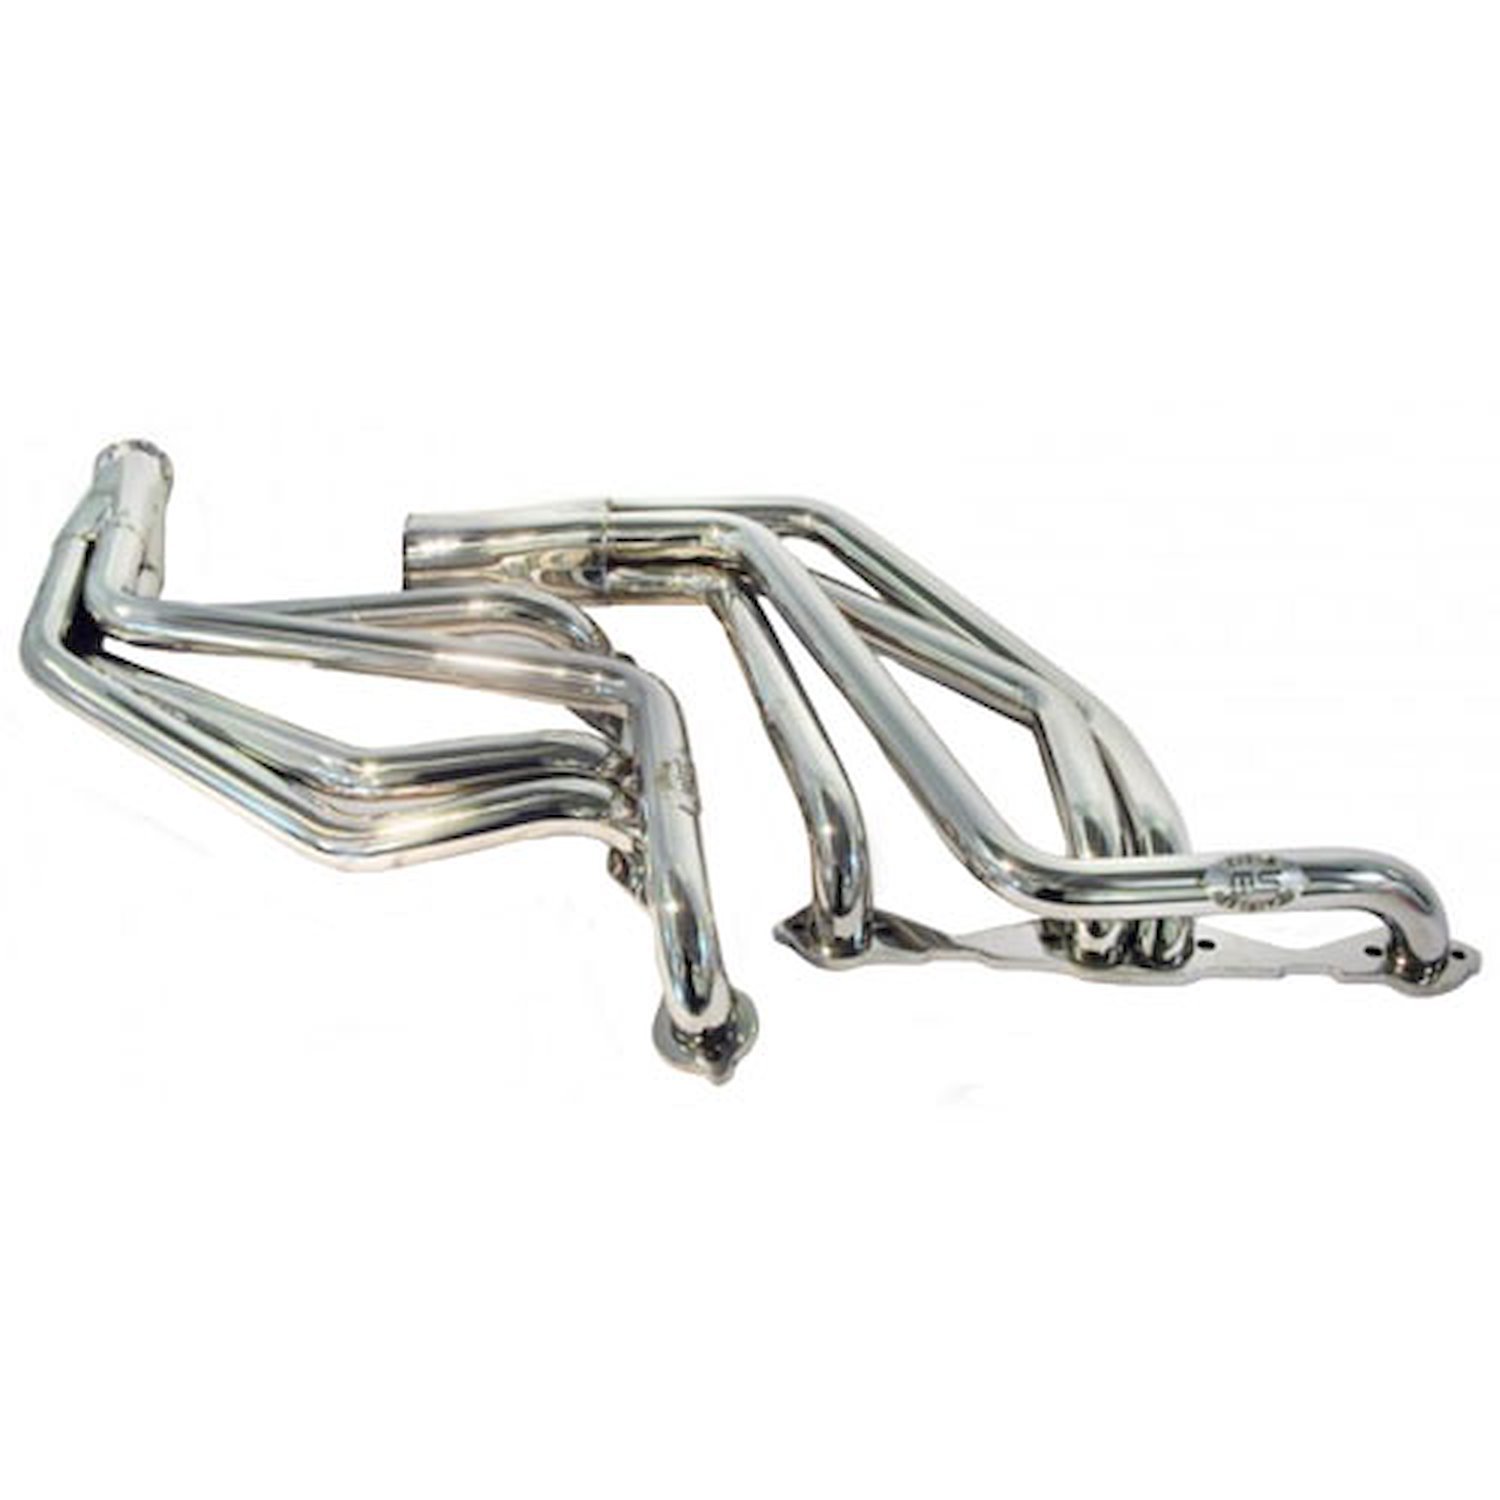 67-87 Chevy/GMC Truck headers for manual transmission. 1 5/8 .065 wall thickness cnc mandrel bent pr